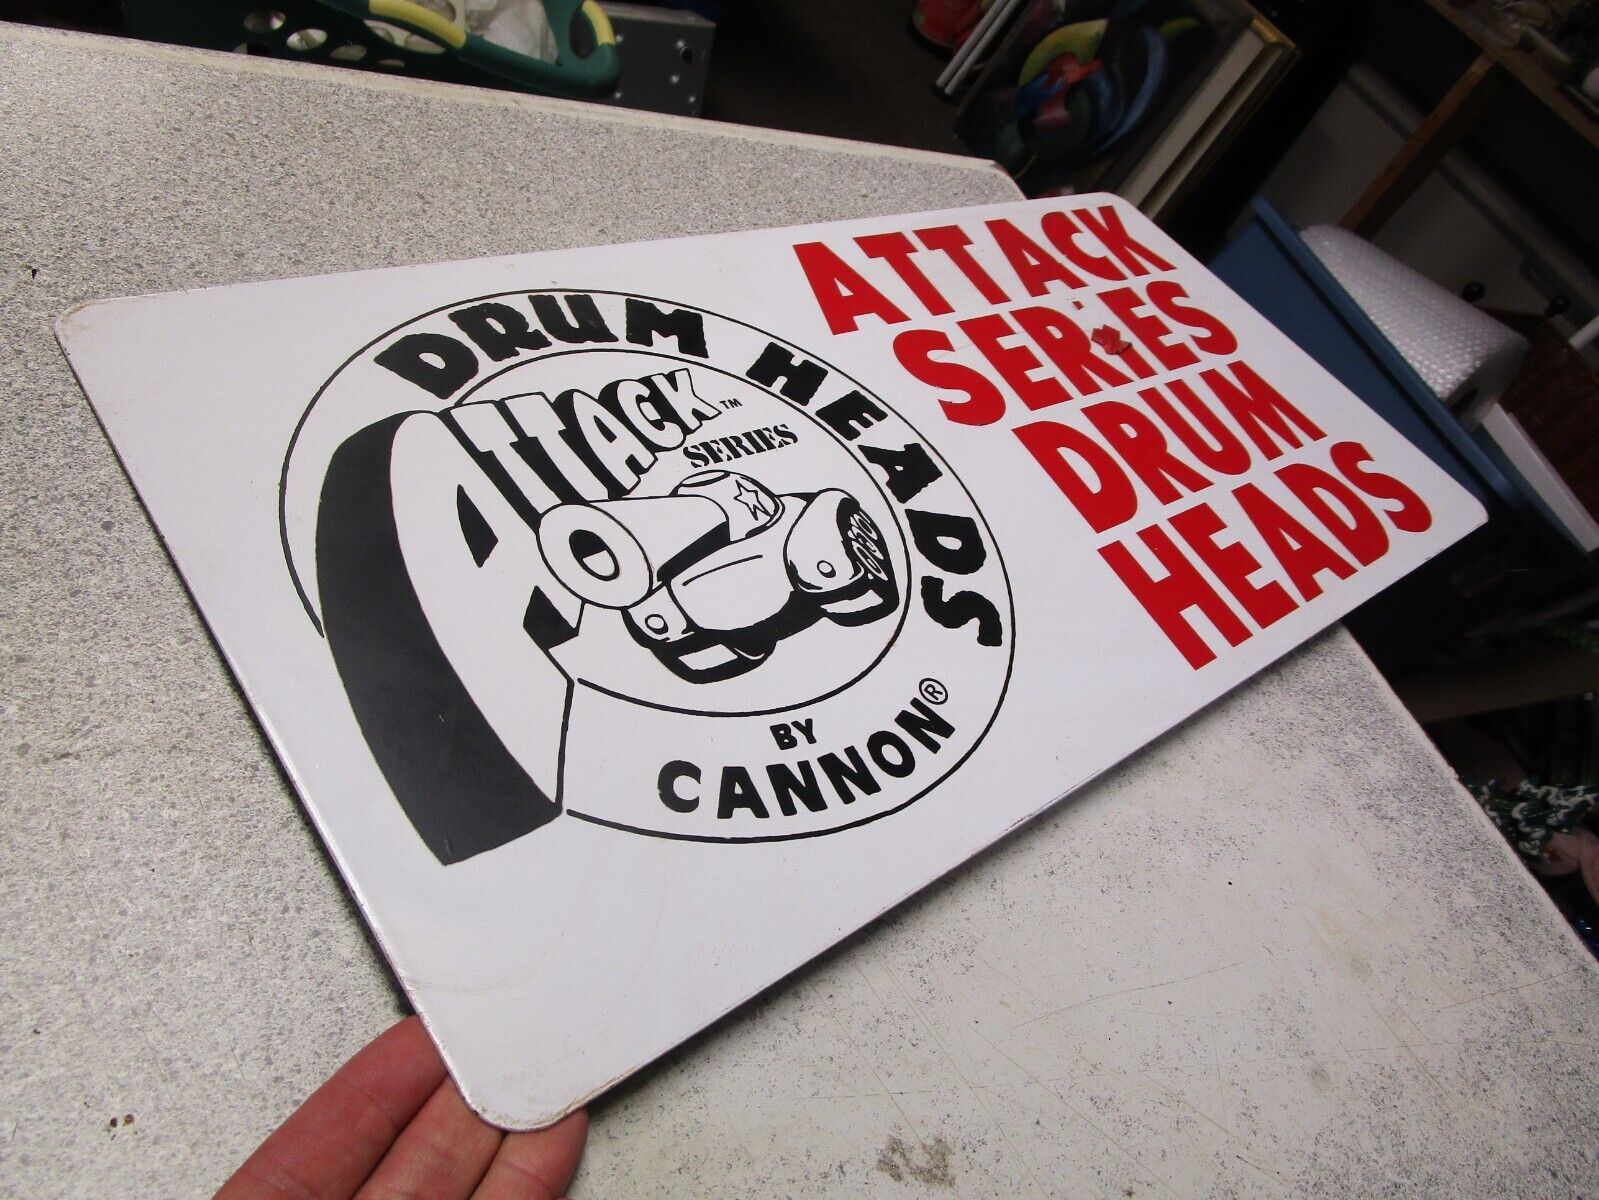 VTG Cannon Attack Series Drum Heads Heavyweight Metal Sign advertising